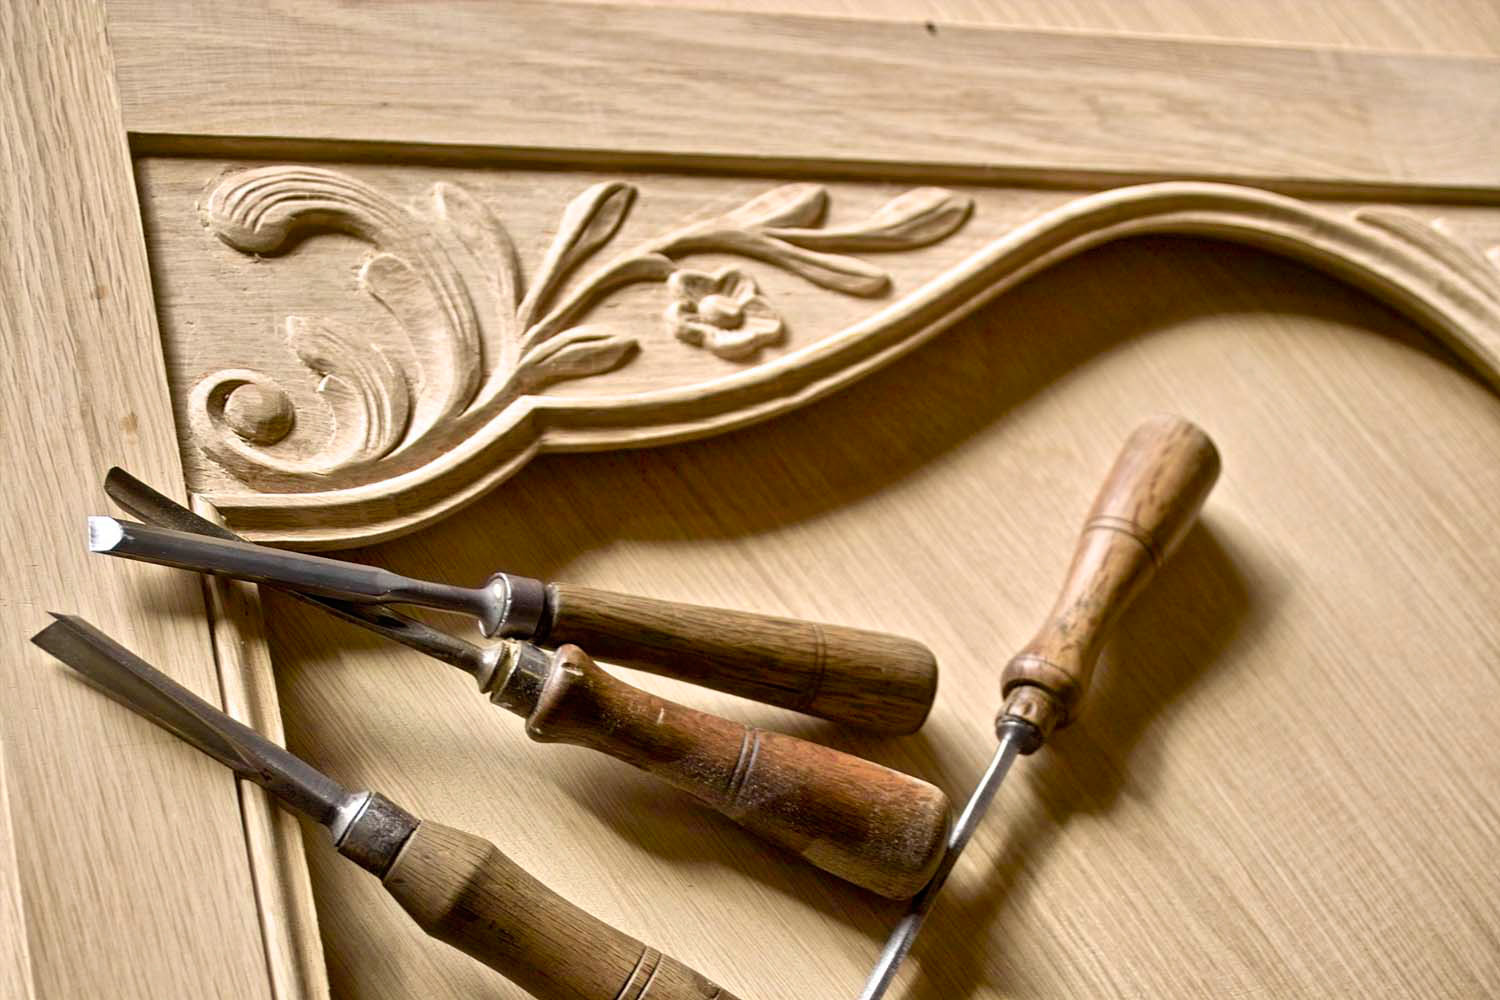 1 Carving tools and timber furniture being made with decorative carving motifs